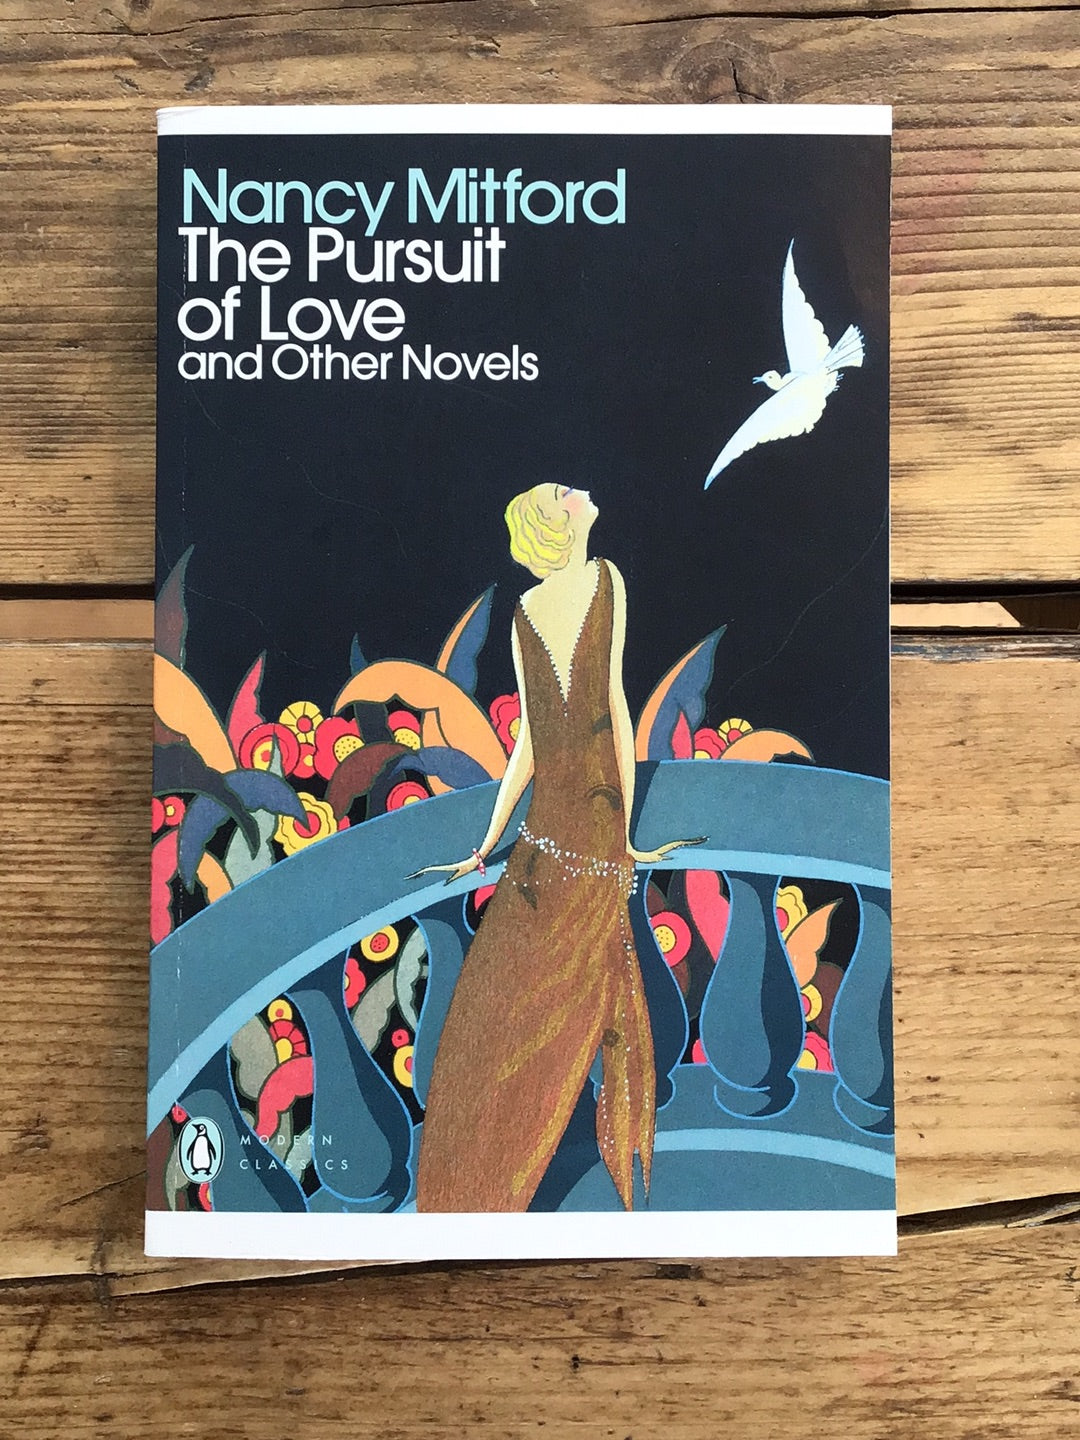 The Pursuit of Love (and other novels)